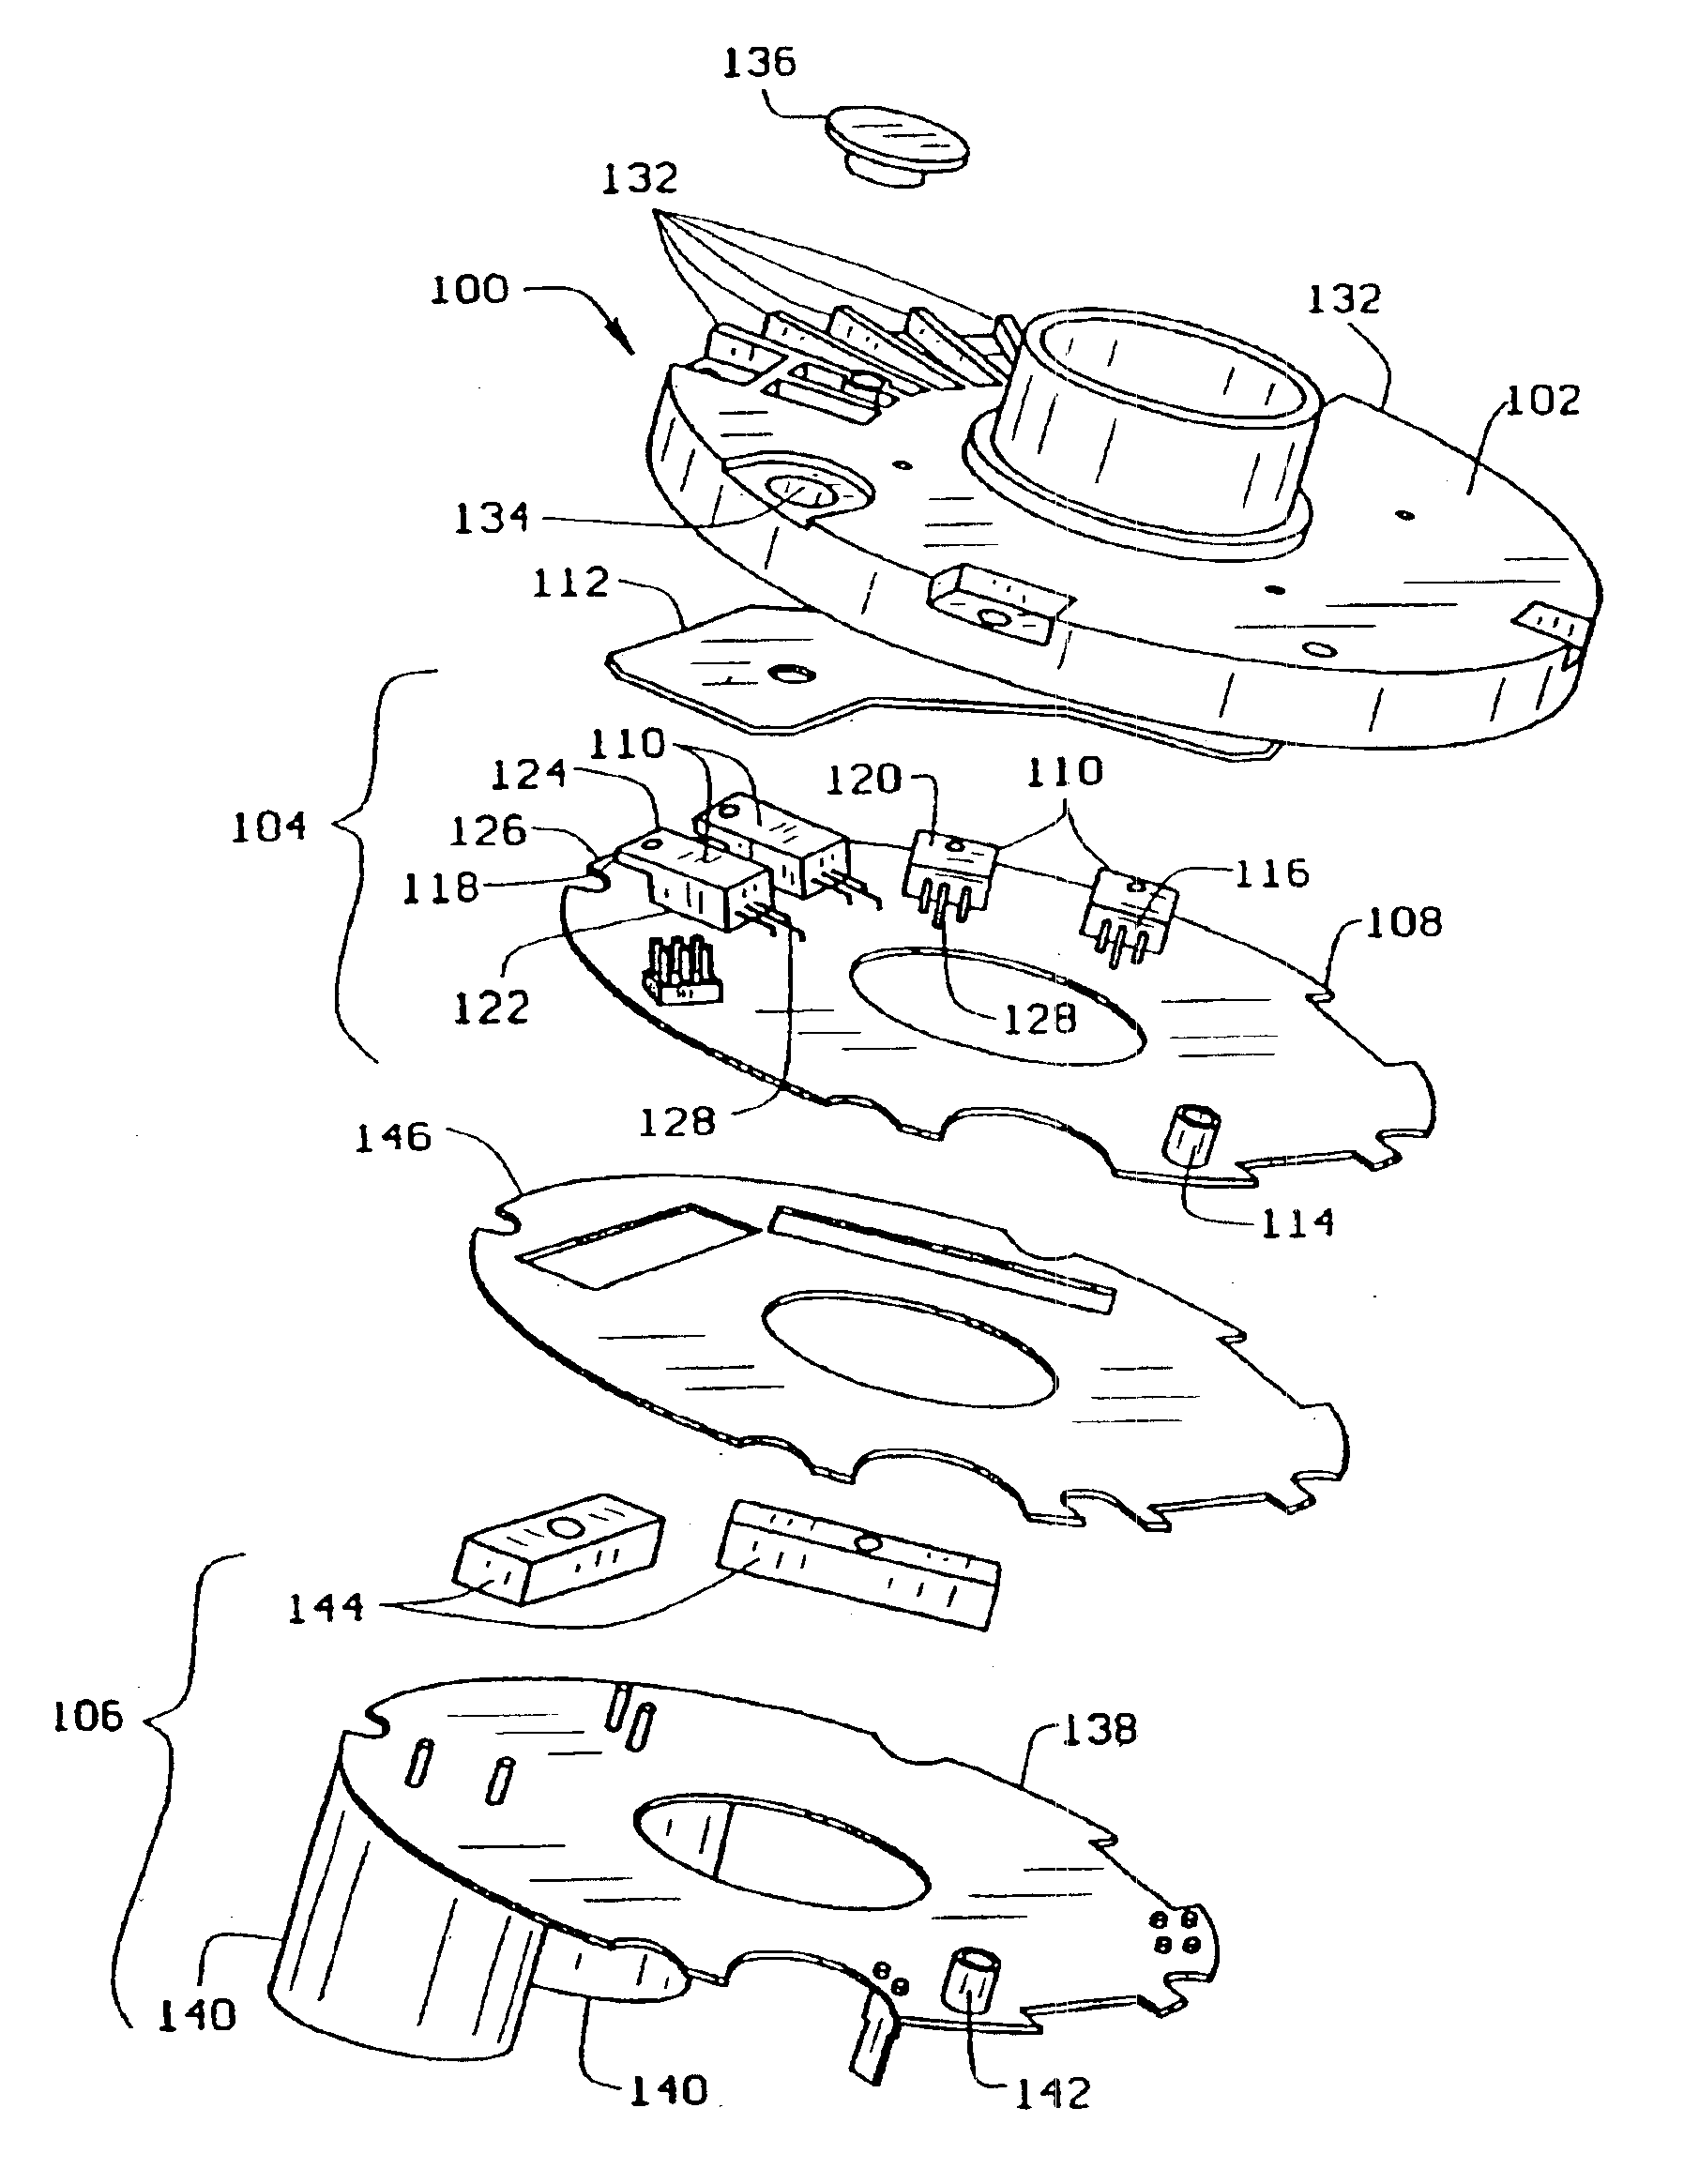 Motor endshield assembly for an electronically commutated motor